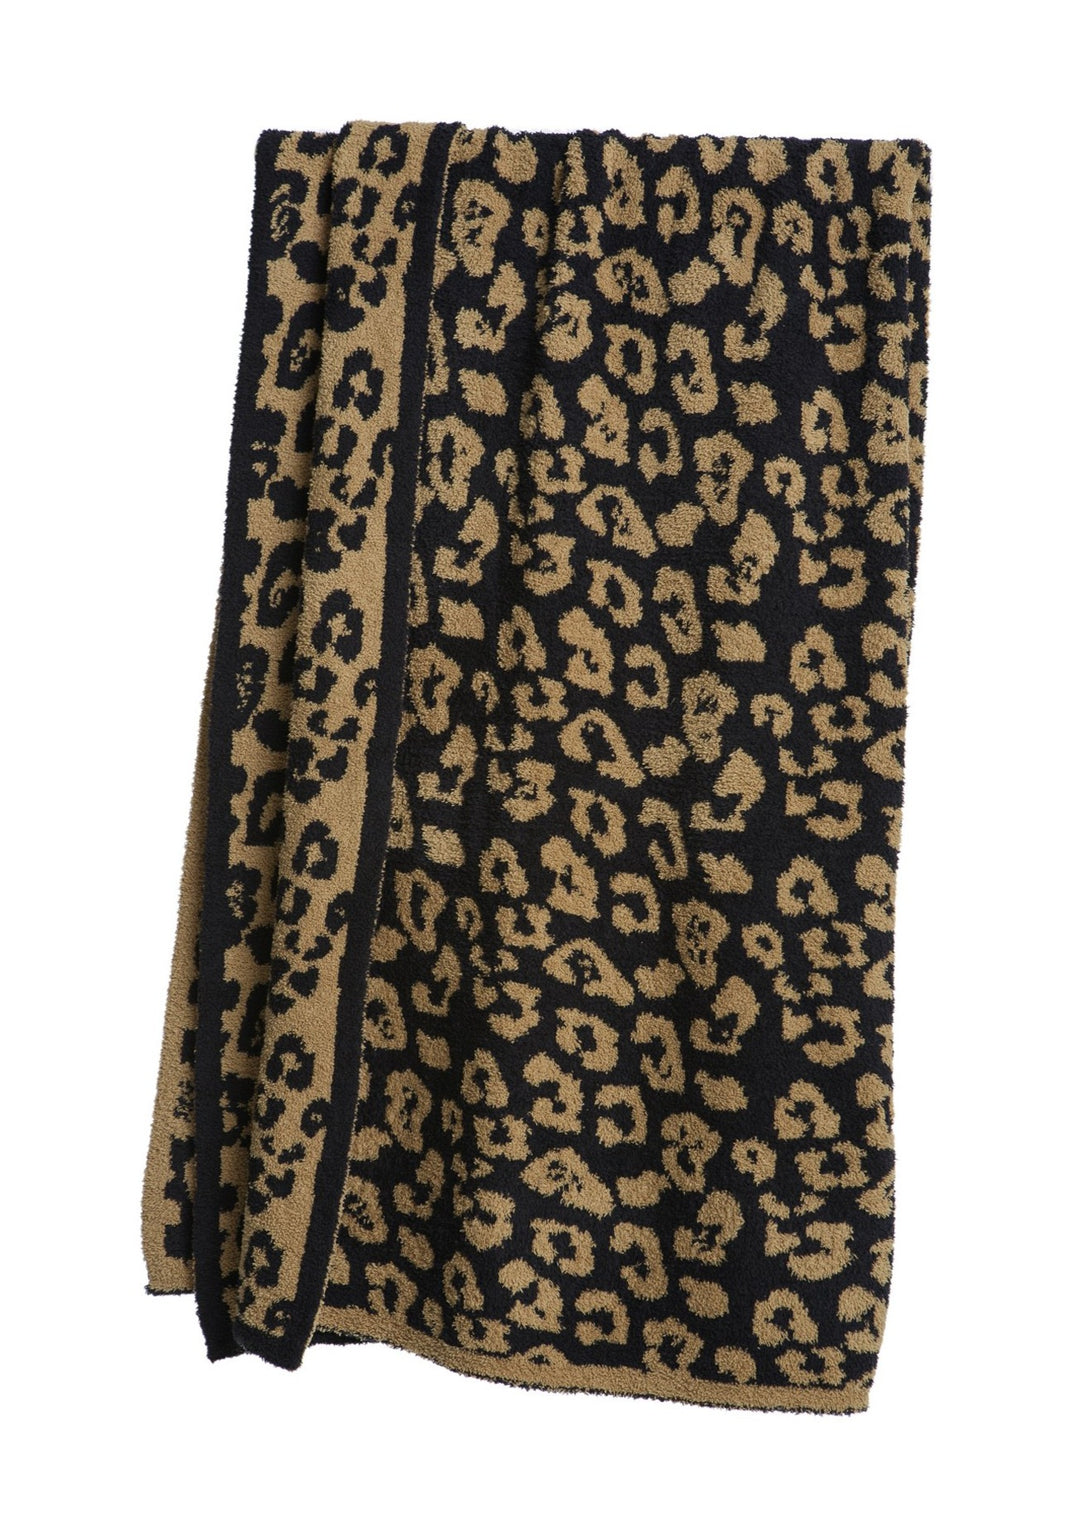 CozyChic® Barefoot in the Wild® Throw - Camel / Black - FINAL SALE